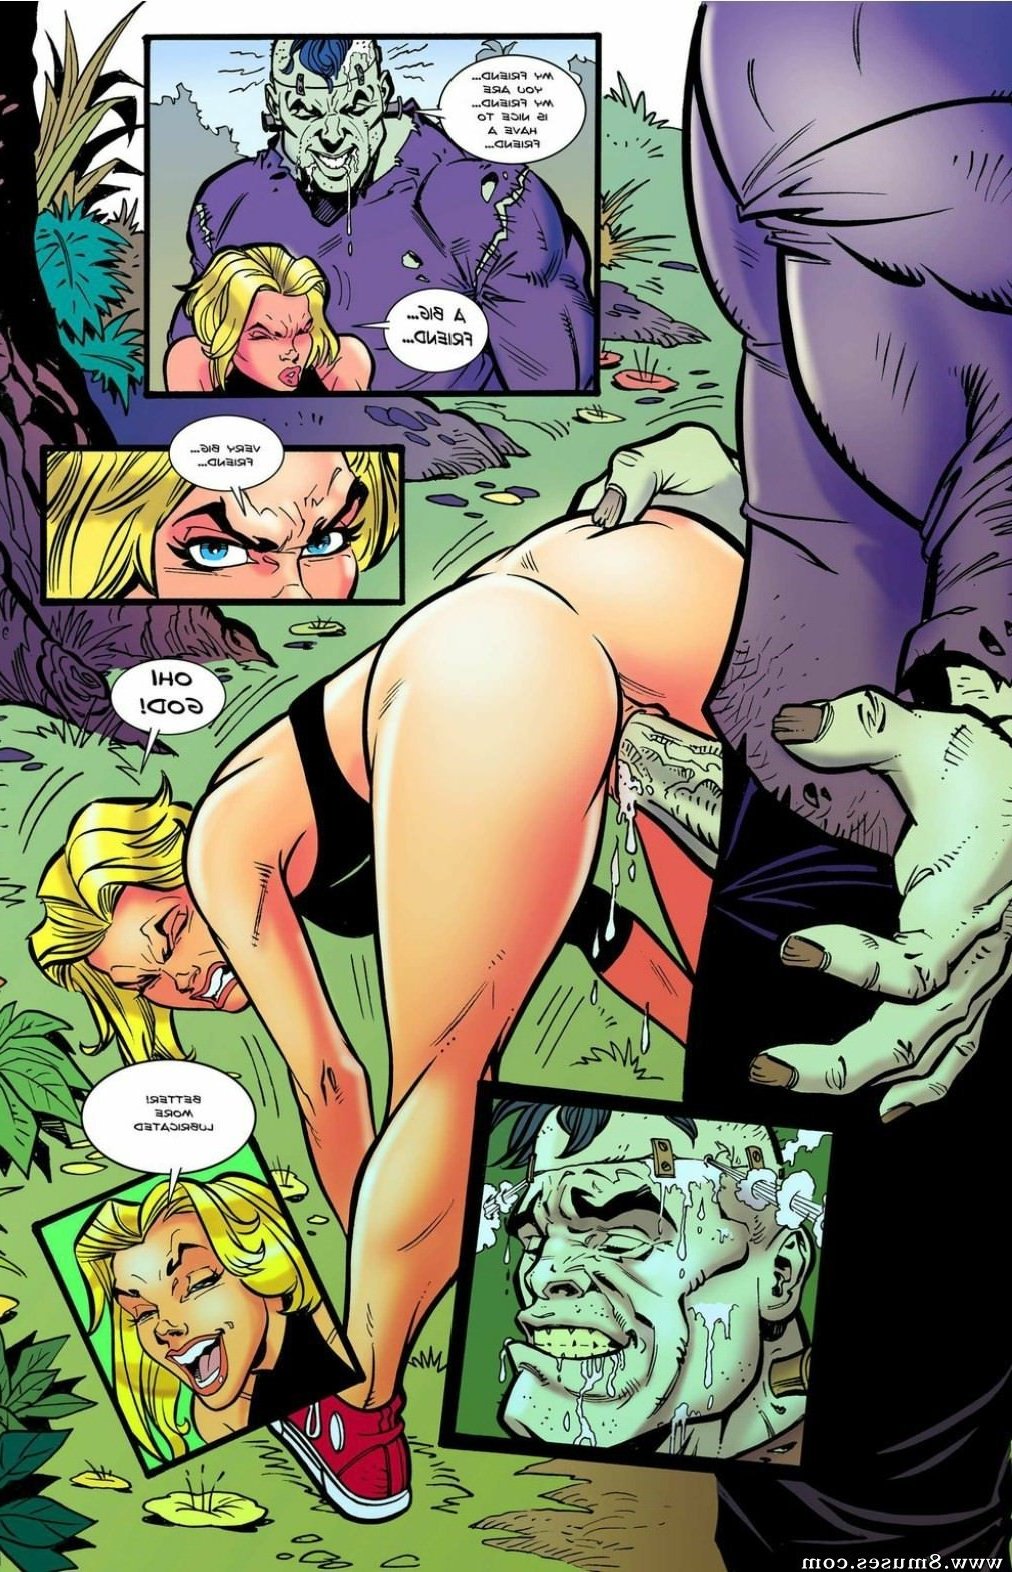 BE-Story-Club-Comics/Danger-Breast/Issue-3 Danger_Breast_-_Issue_3.jpg